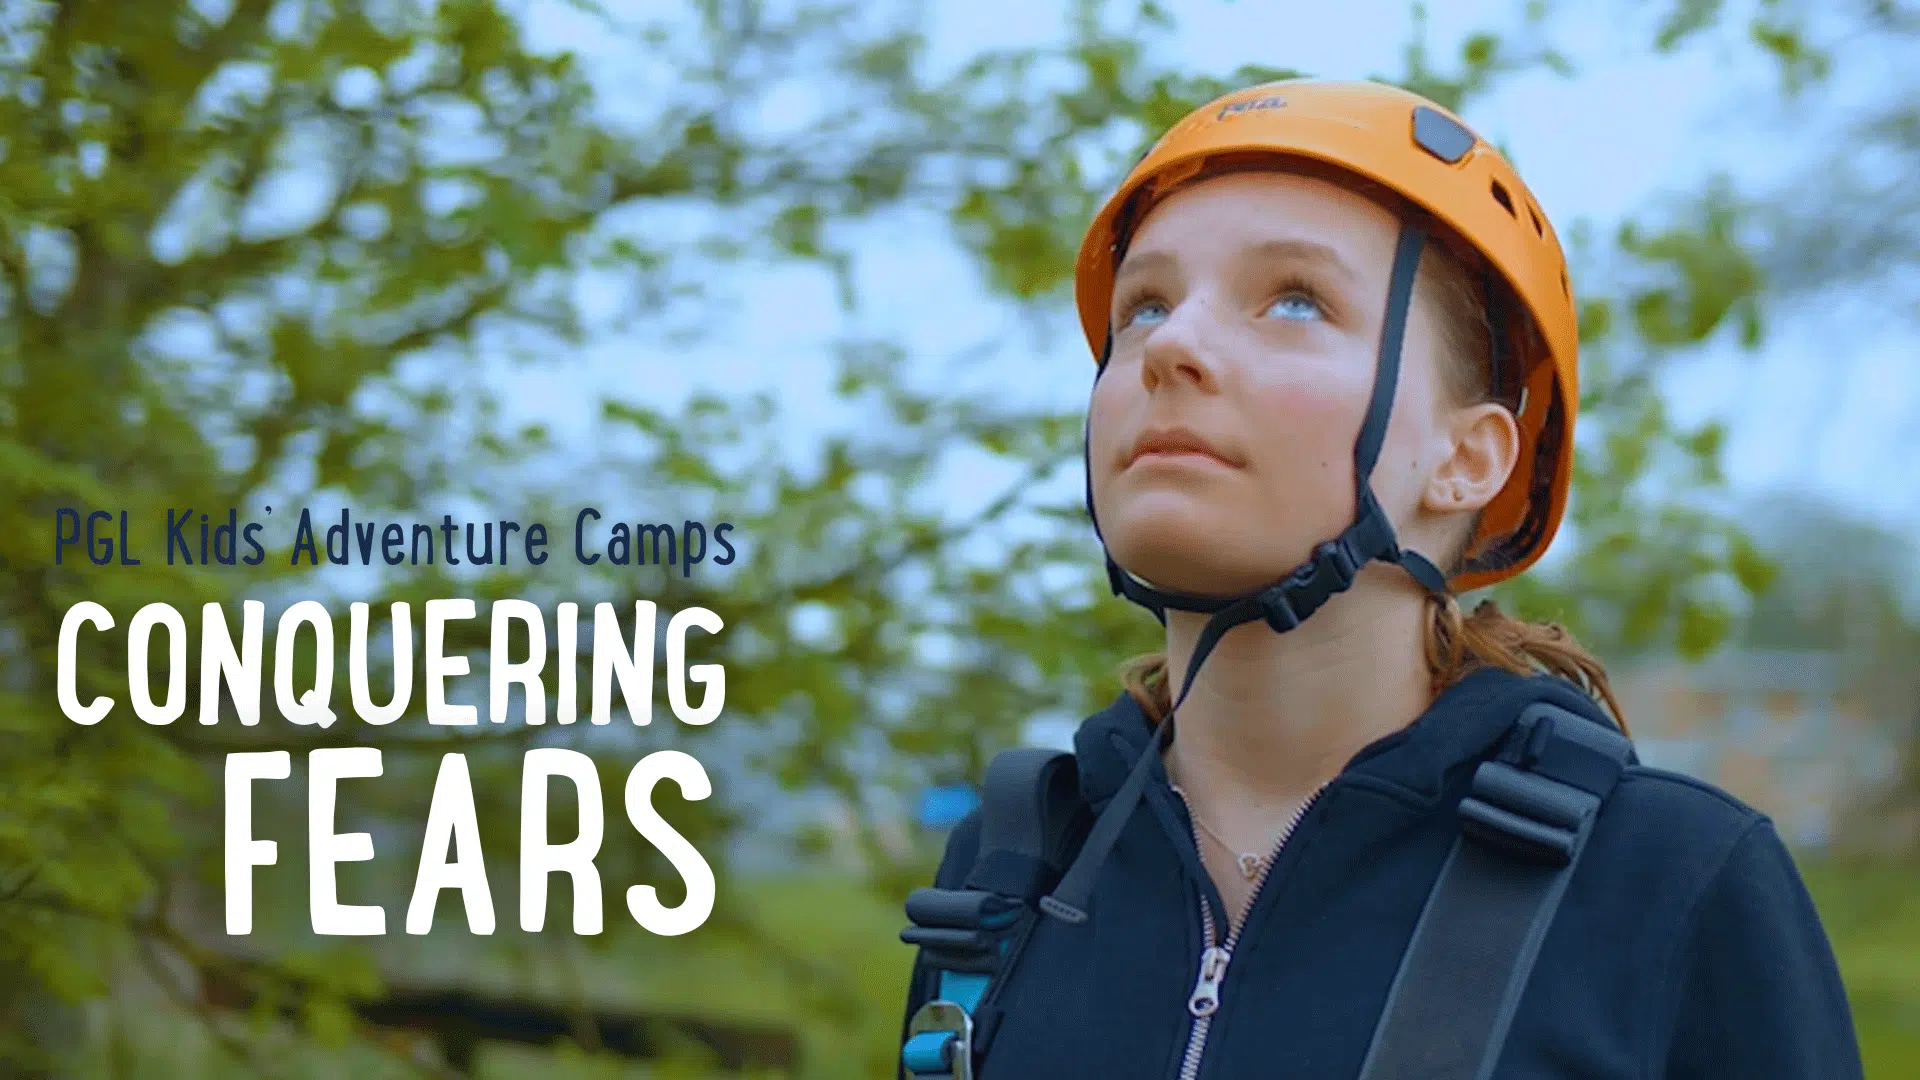 A child in outdoor gear and a helmet gazes upwards. Text reads, "PGL Kids Adventure Camps CONQUERING FEARS." Trees and nature are visible in the background.